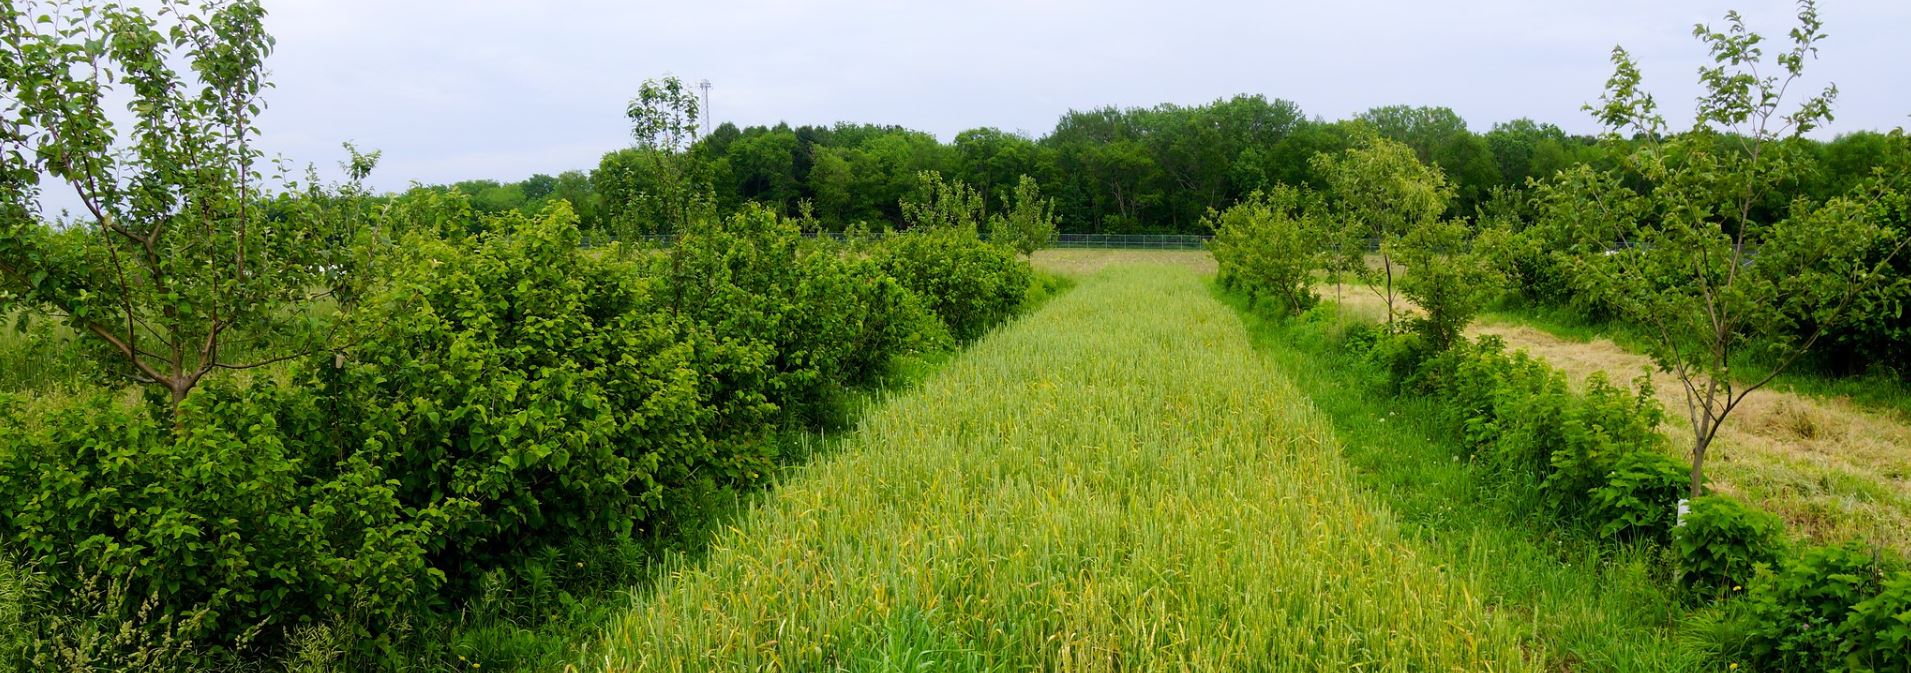 Figure 2: A diverse alley cropping system in Illinois featuring a small grain alley crop combined with a variety of shrub and tree crops.